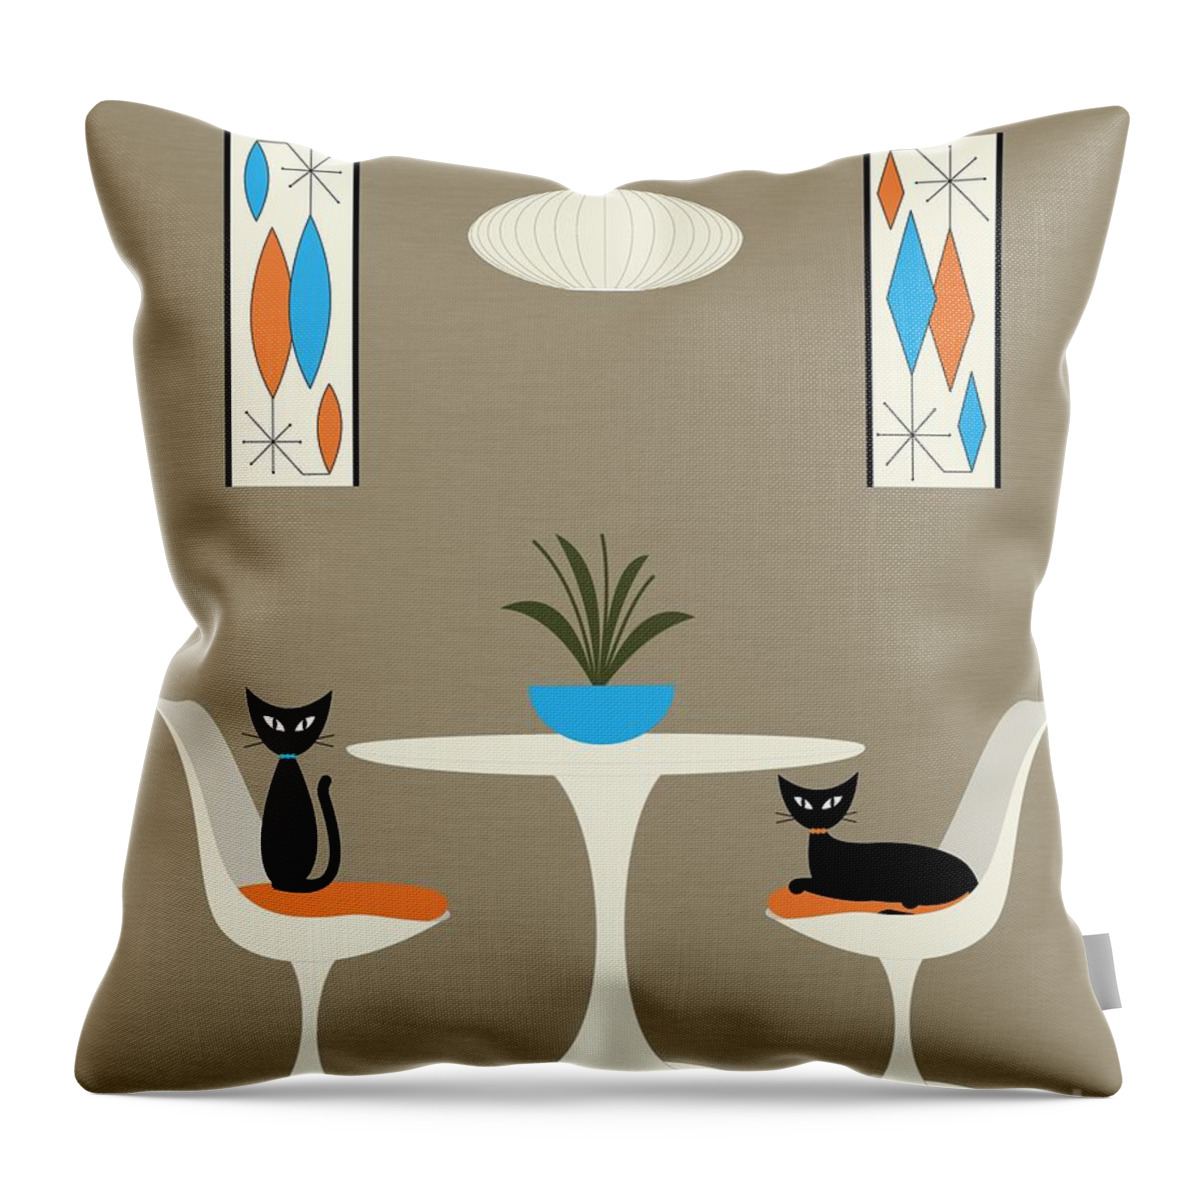 Mid-century Modern Throw Pillow featuring the digital art Knoll Table by Donna Mibus